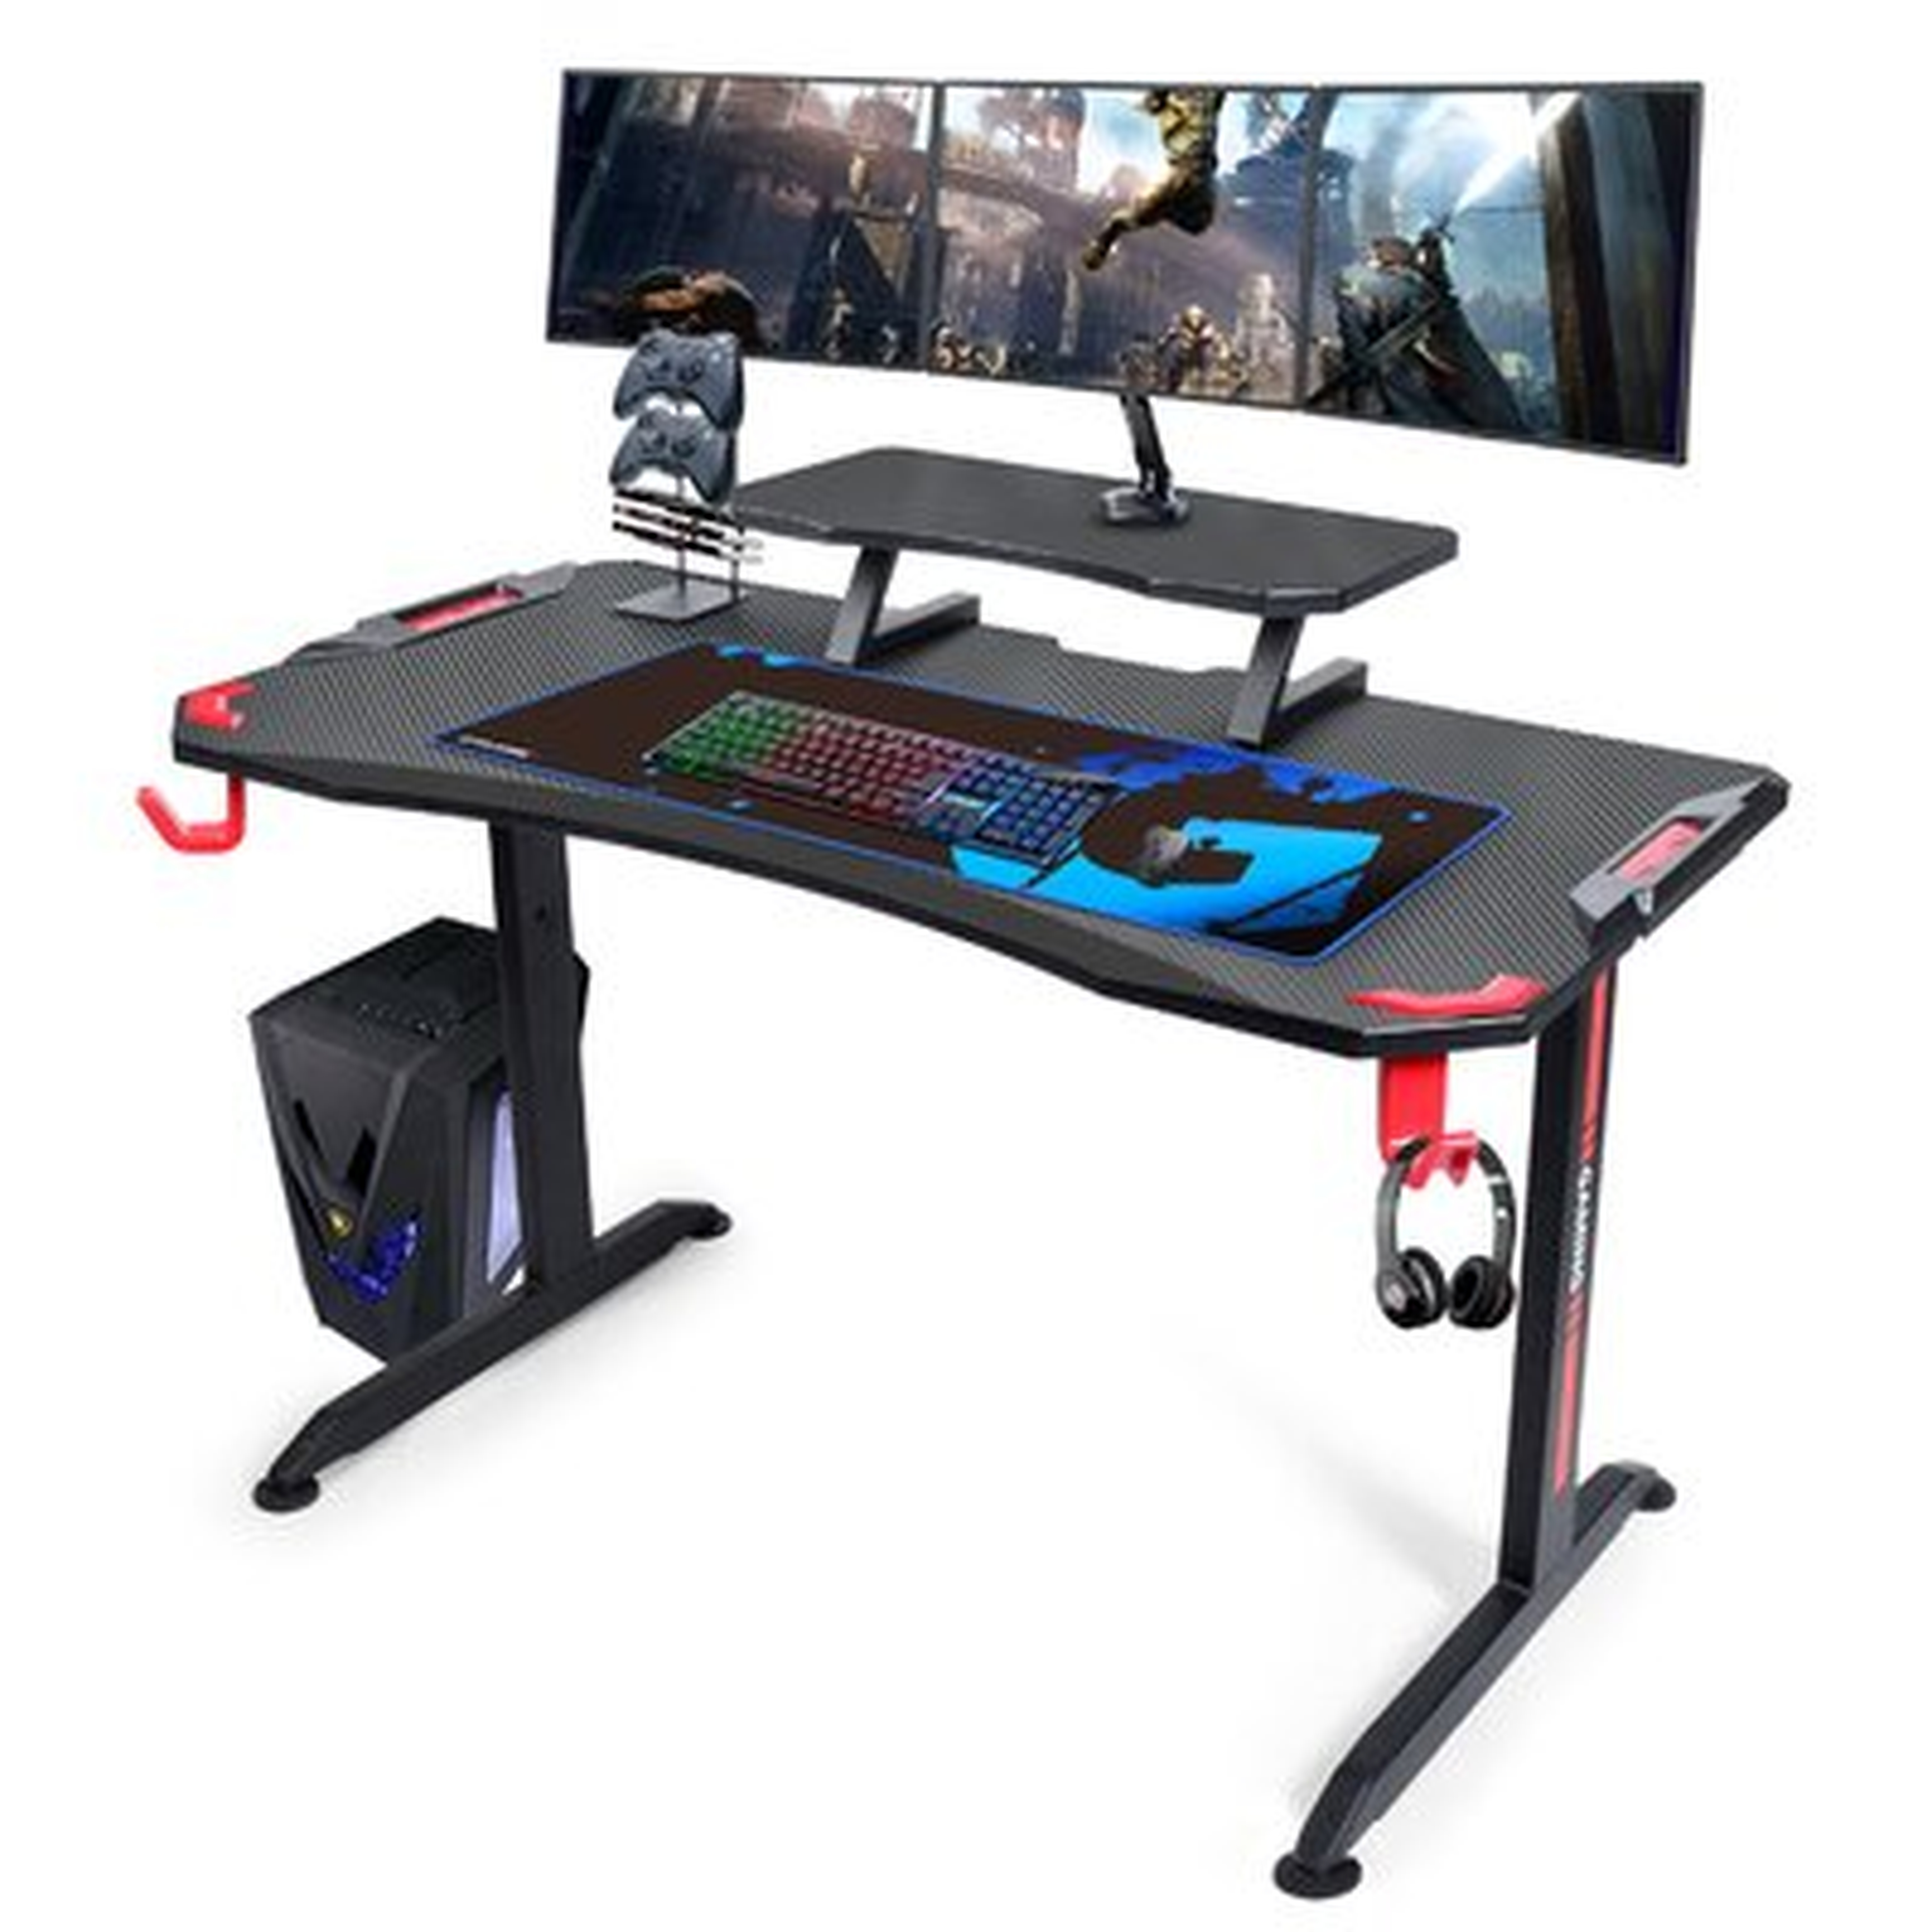 Gtracing Computer Gaming Desk With Monitor Stand - Wayfair